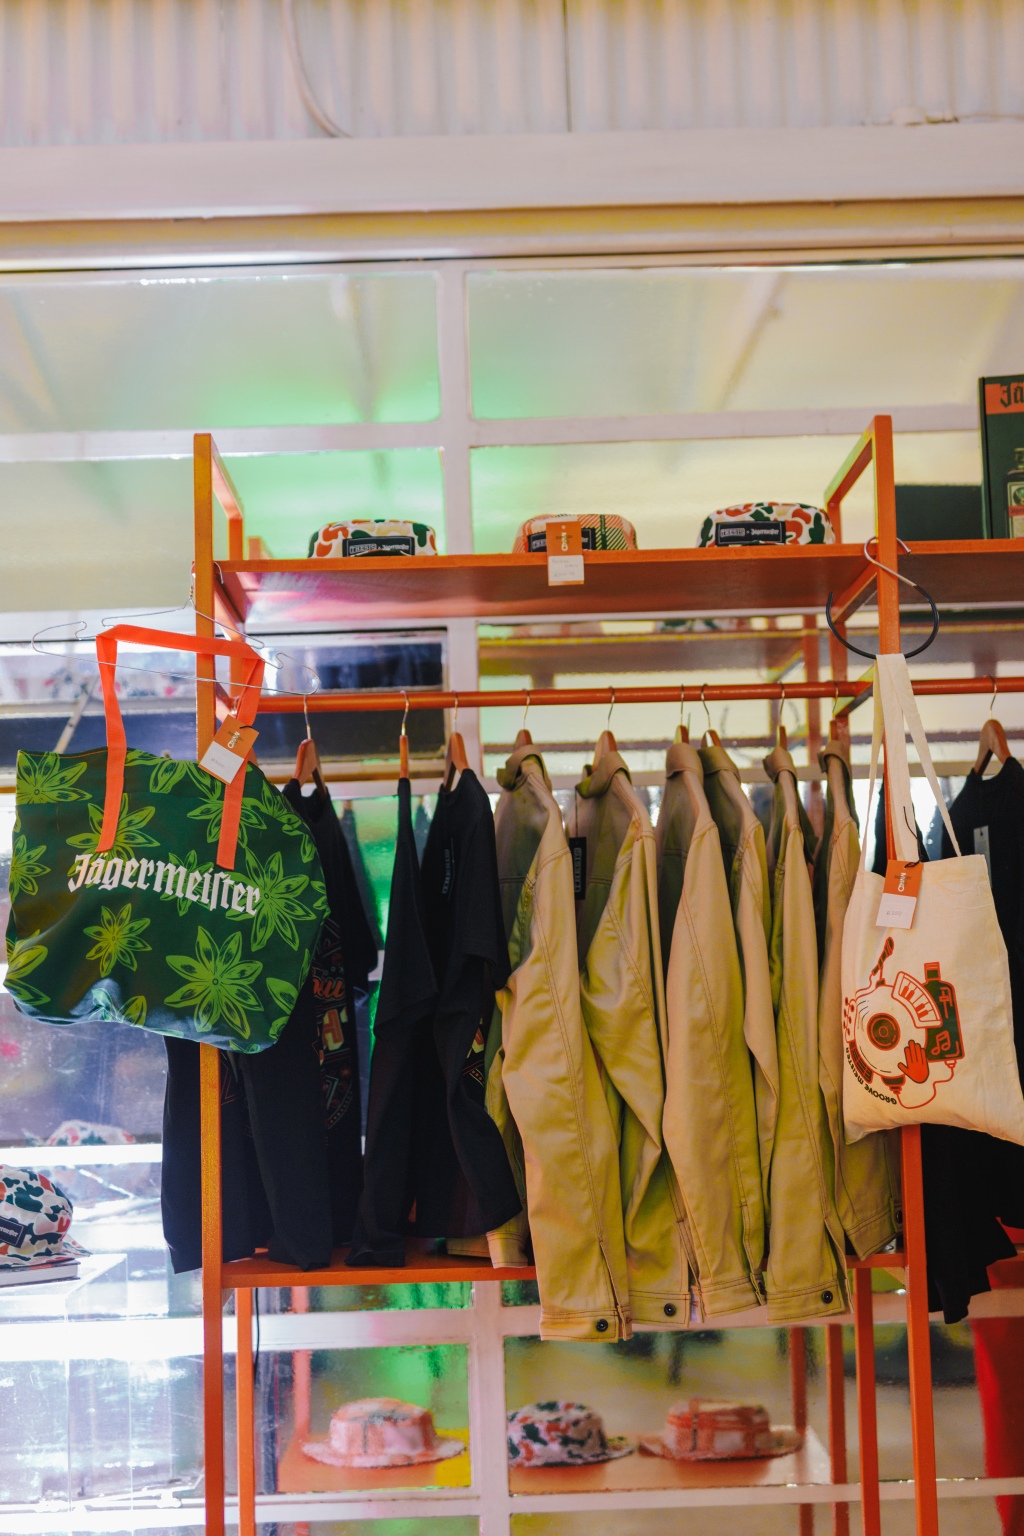 Thesis winter collection displayed at the Jägermeister pop-up event in Braamfontein.